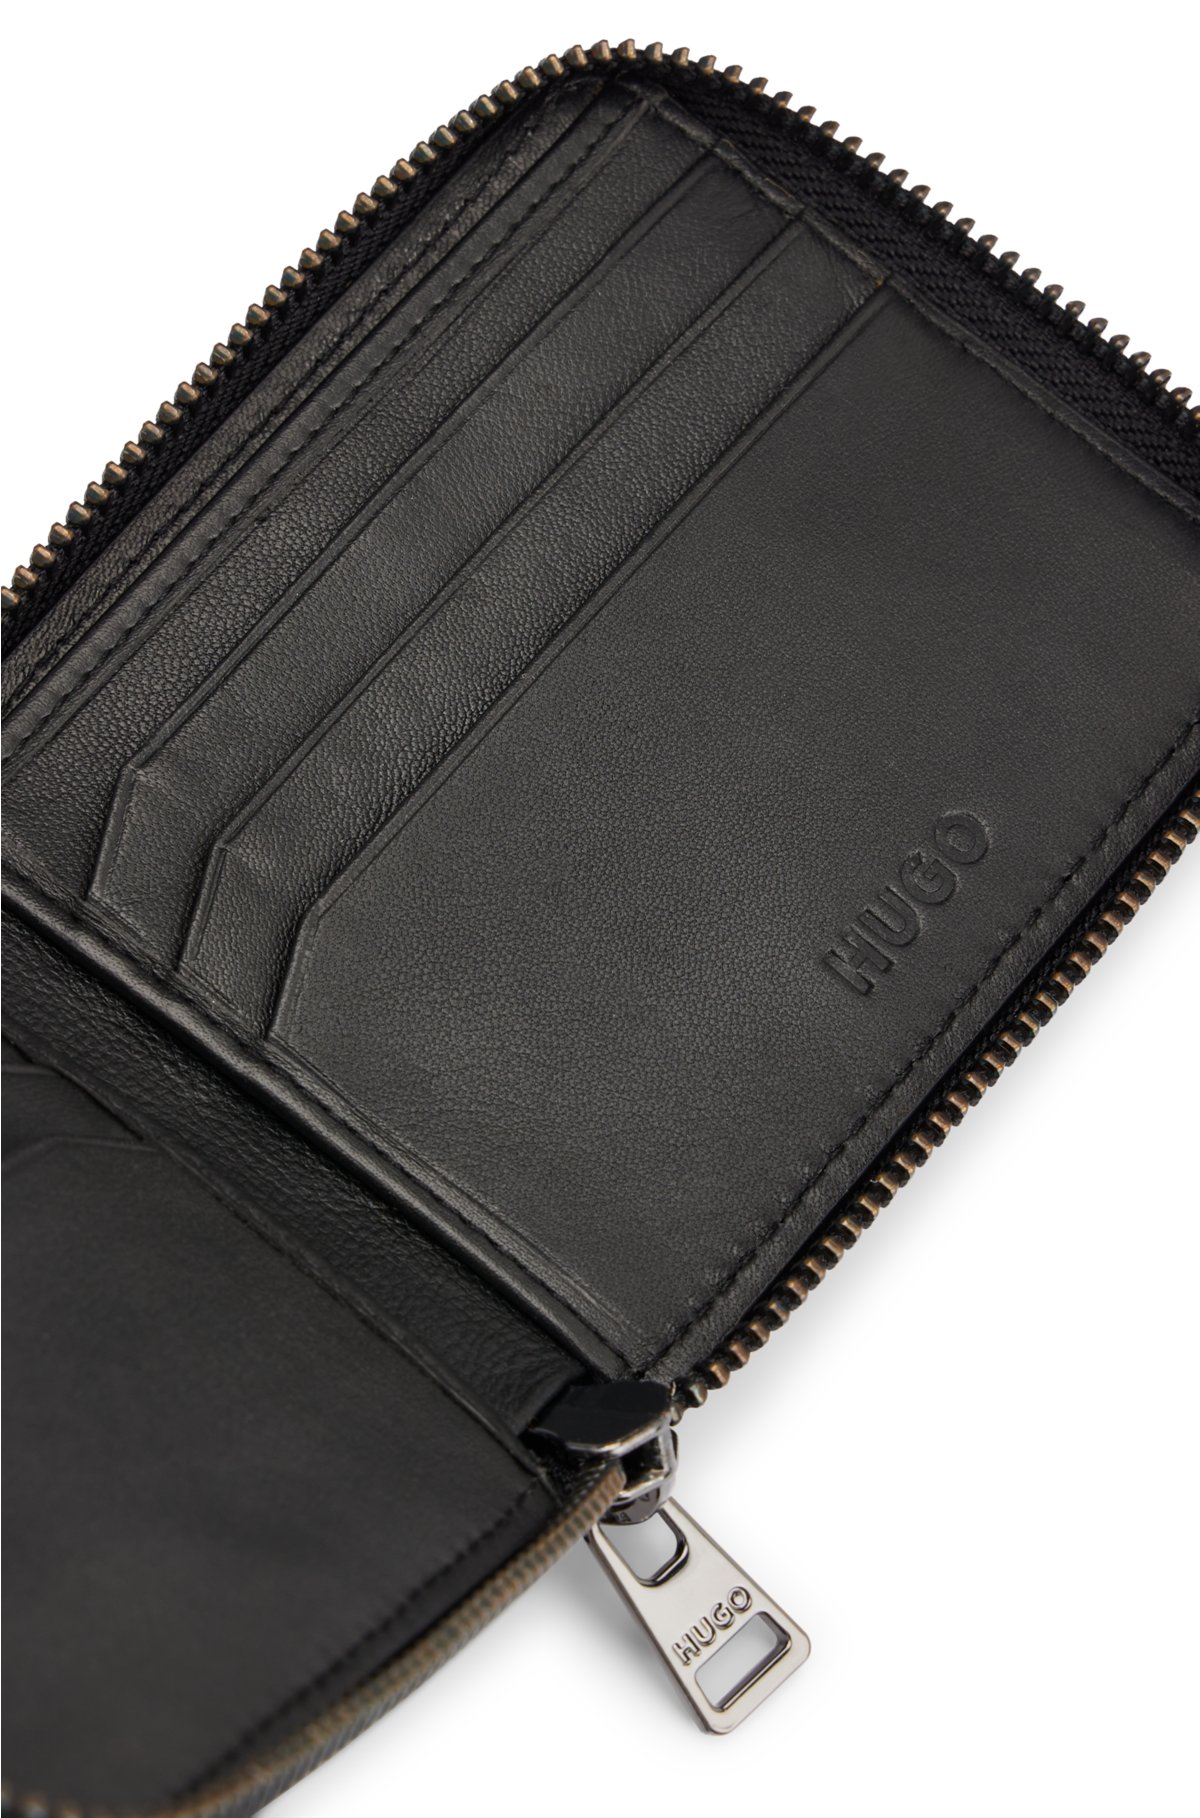 Matte-leather ziparound wallet with stacked logo, Black